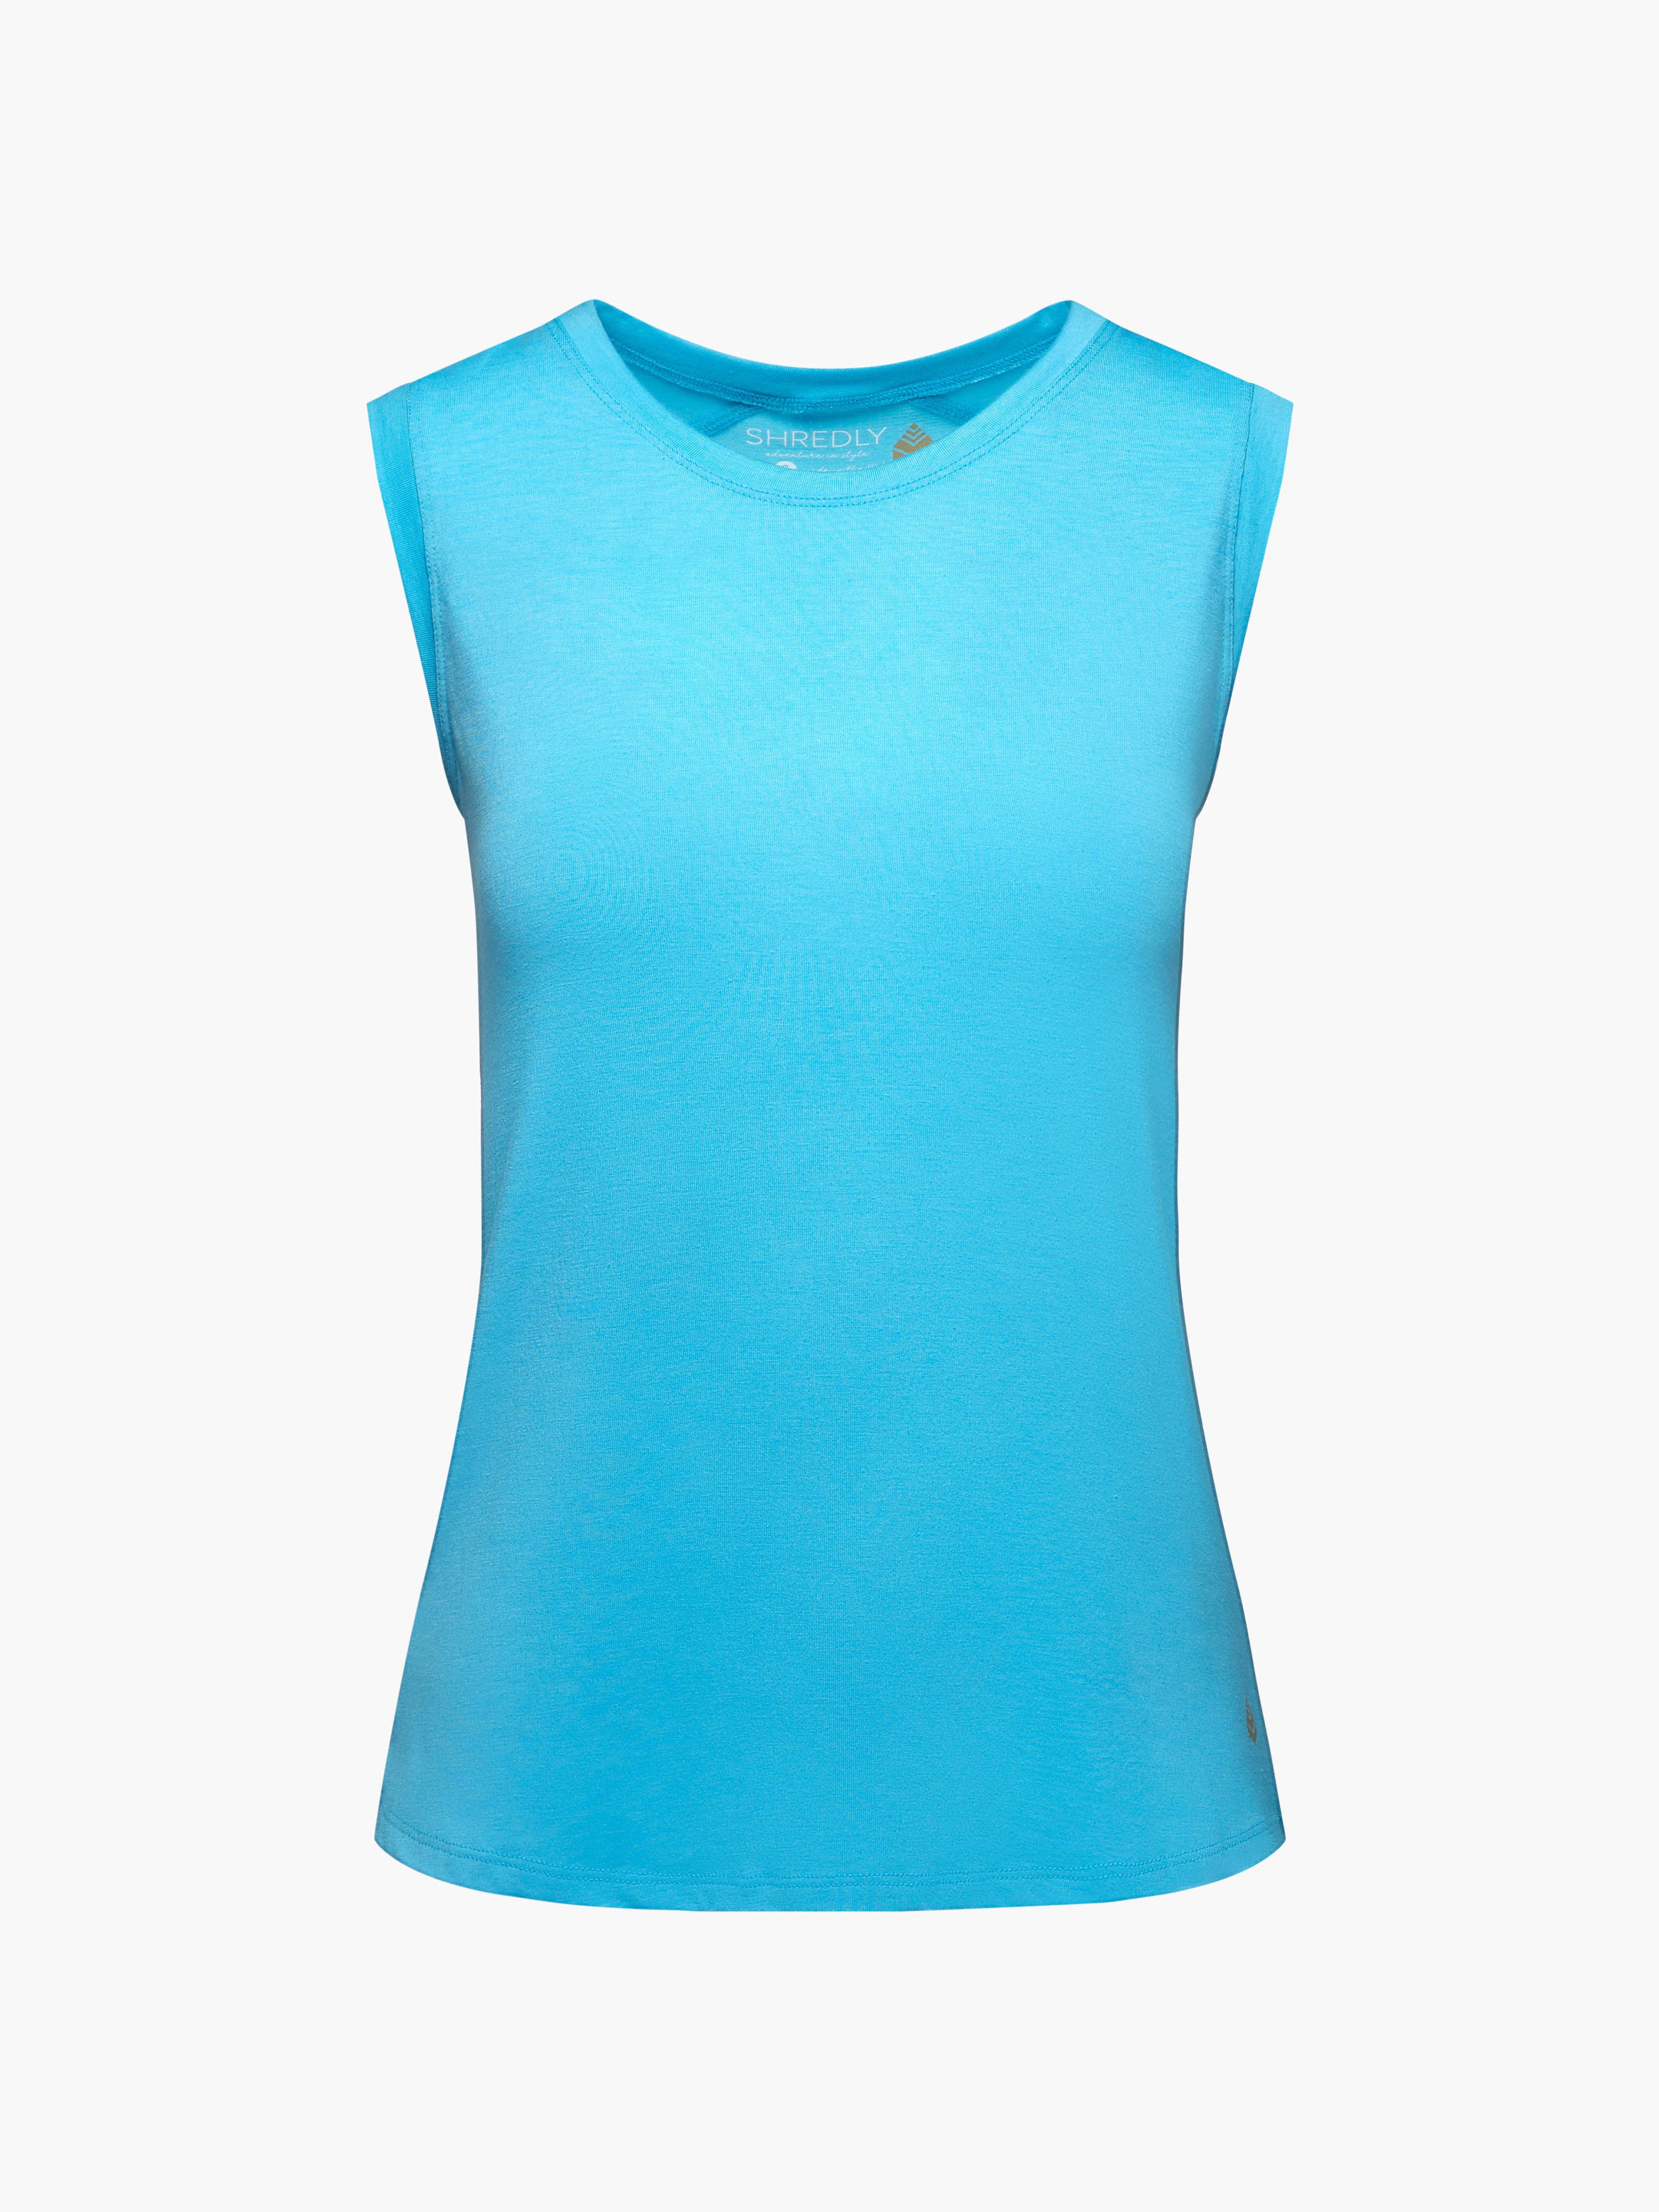 Cadence Tank : Electric Blue - Women's | SHREDLY